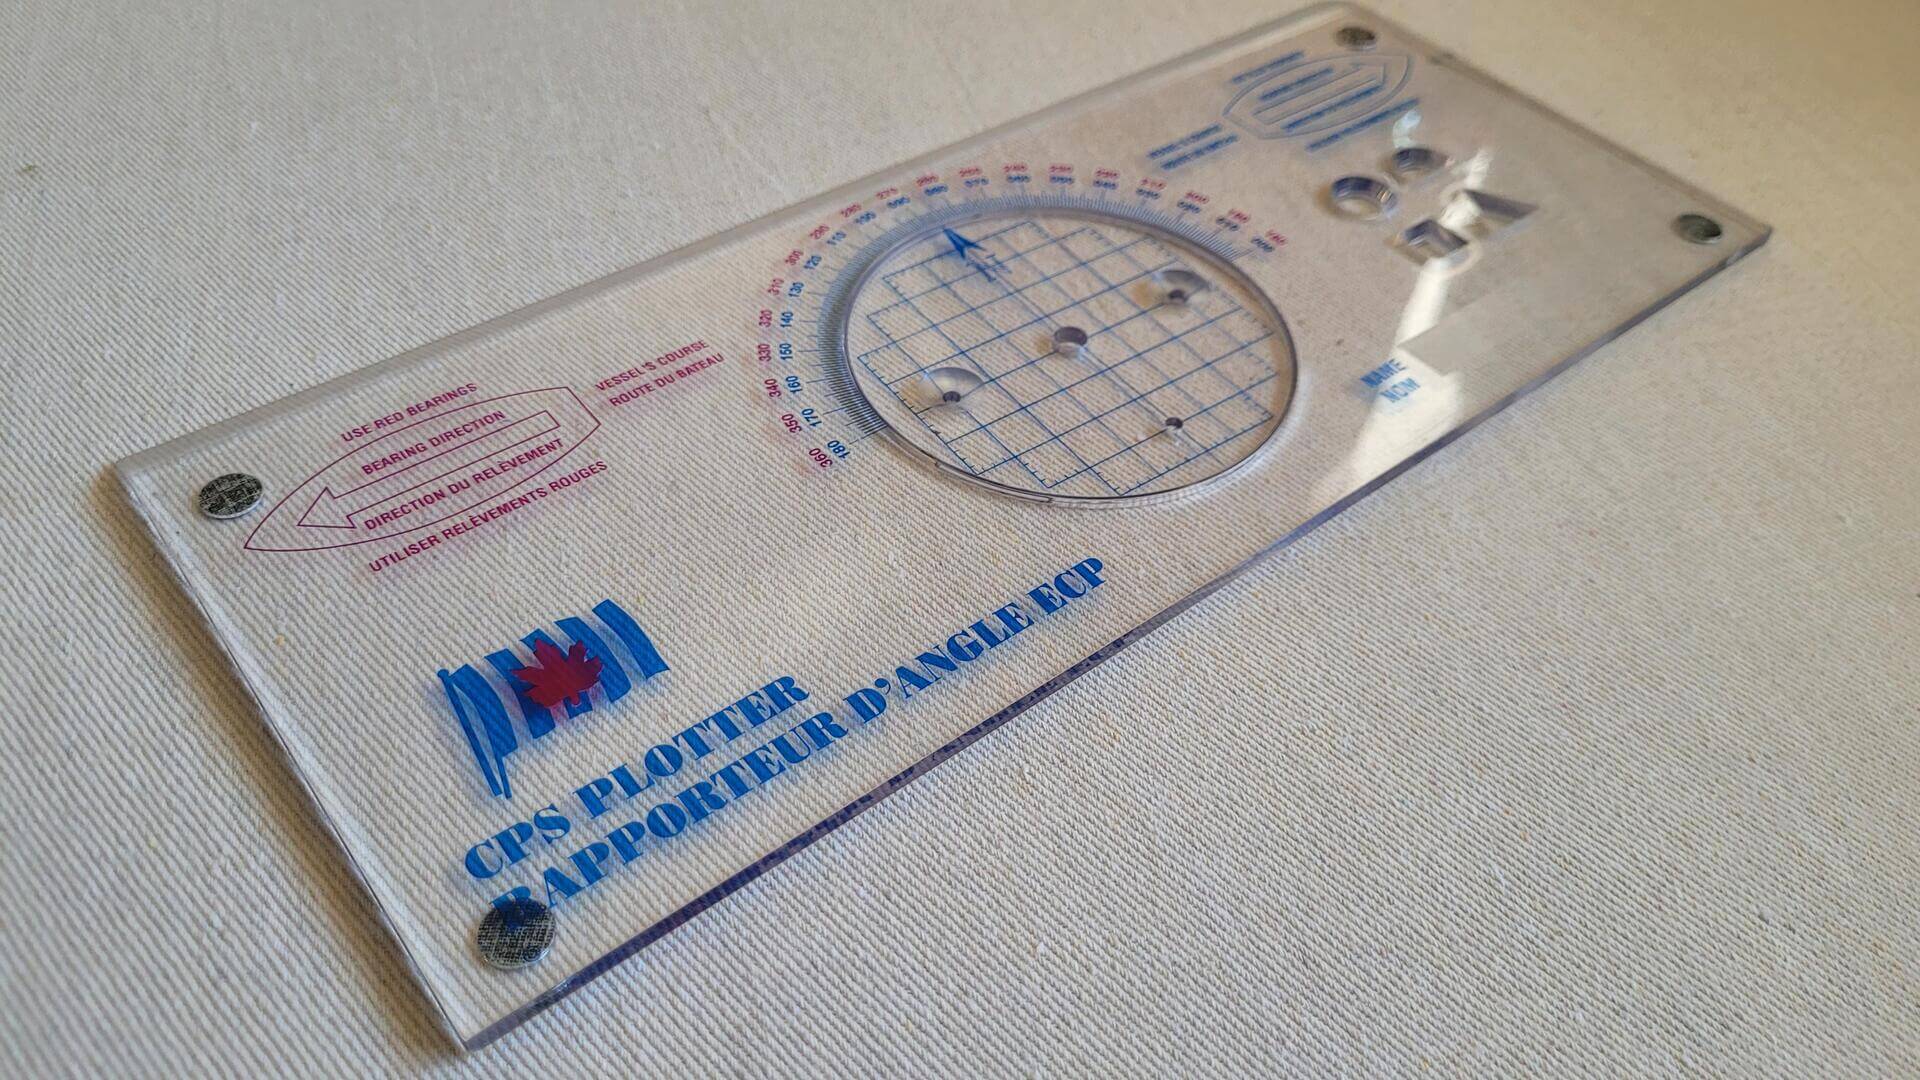 Canadian Sail and Power Squadron navigation protractor and course plotter. Use the nautical CPS plotter to plan a cruise, label course lines, LOPs, DR positions, fixes, and required standards of accuracy for chartwork. Sailing and boating tool for drawing courses or plotting bearings